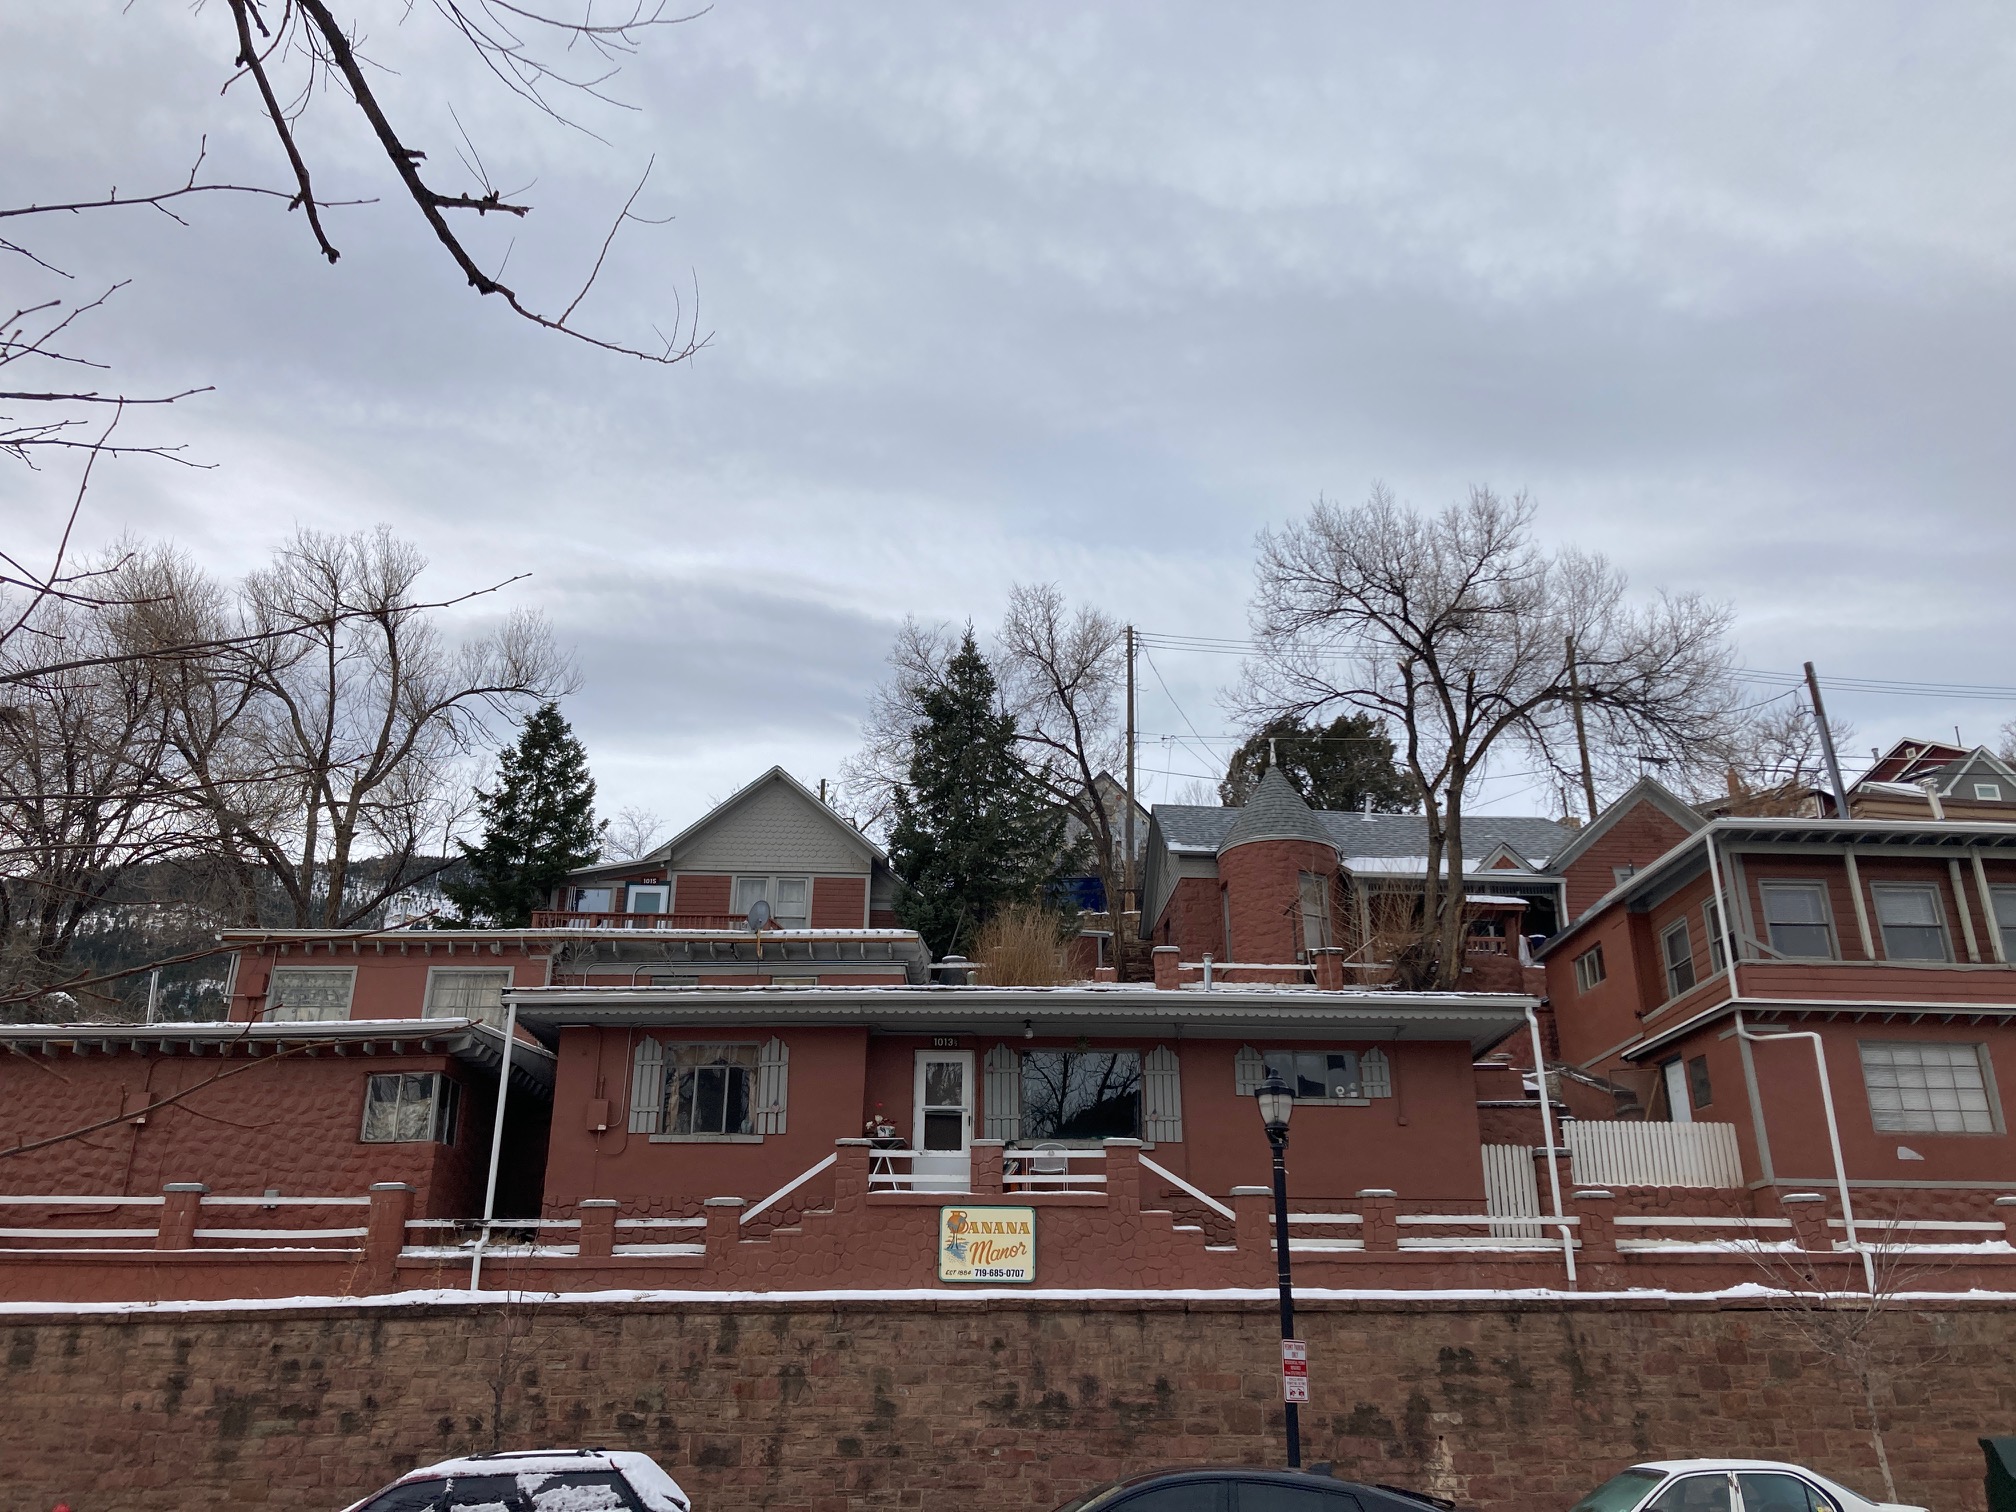 DISCOUNT SALE/LEASEBACK/BUYBACK ON 7 UNITS IN MANITOU SPRINGS